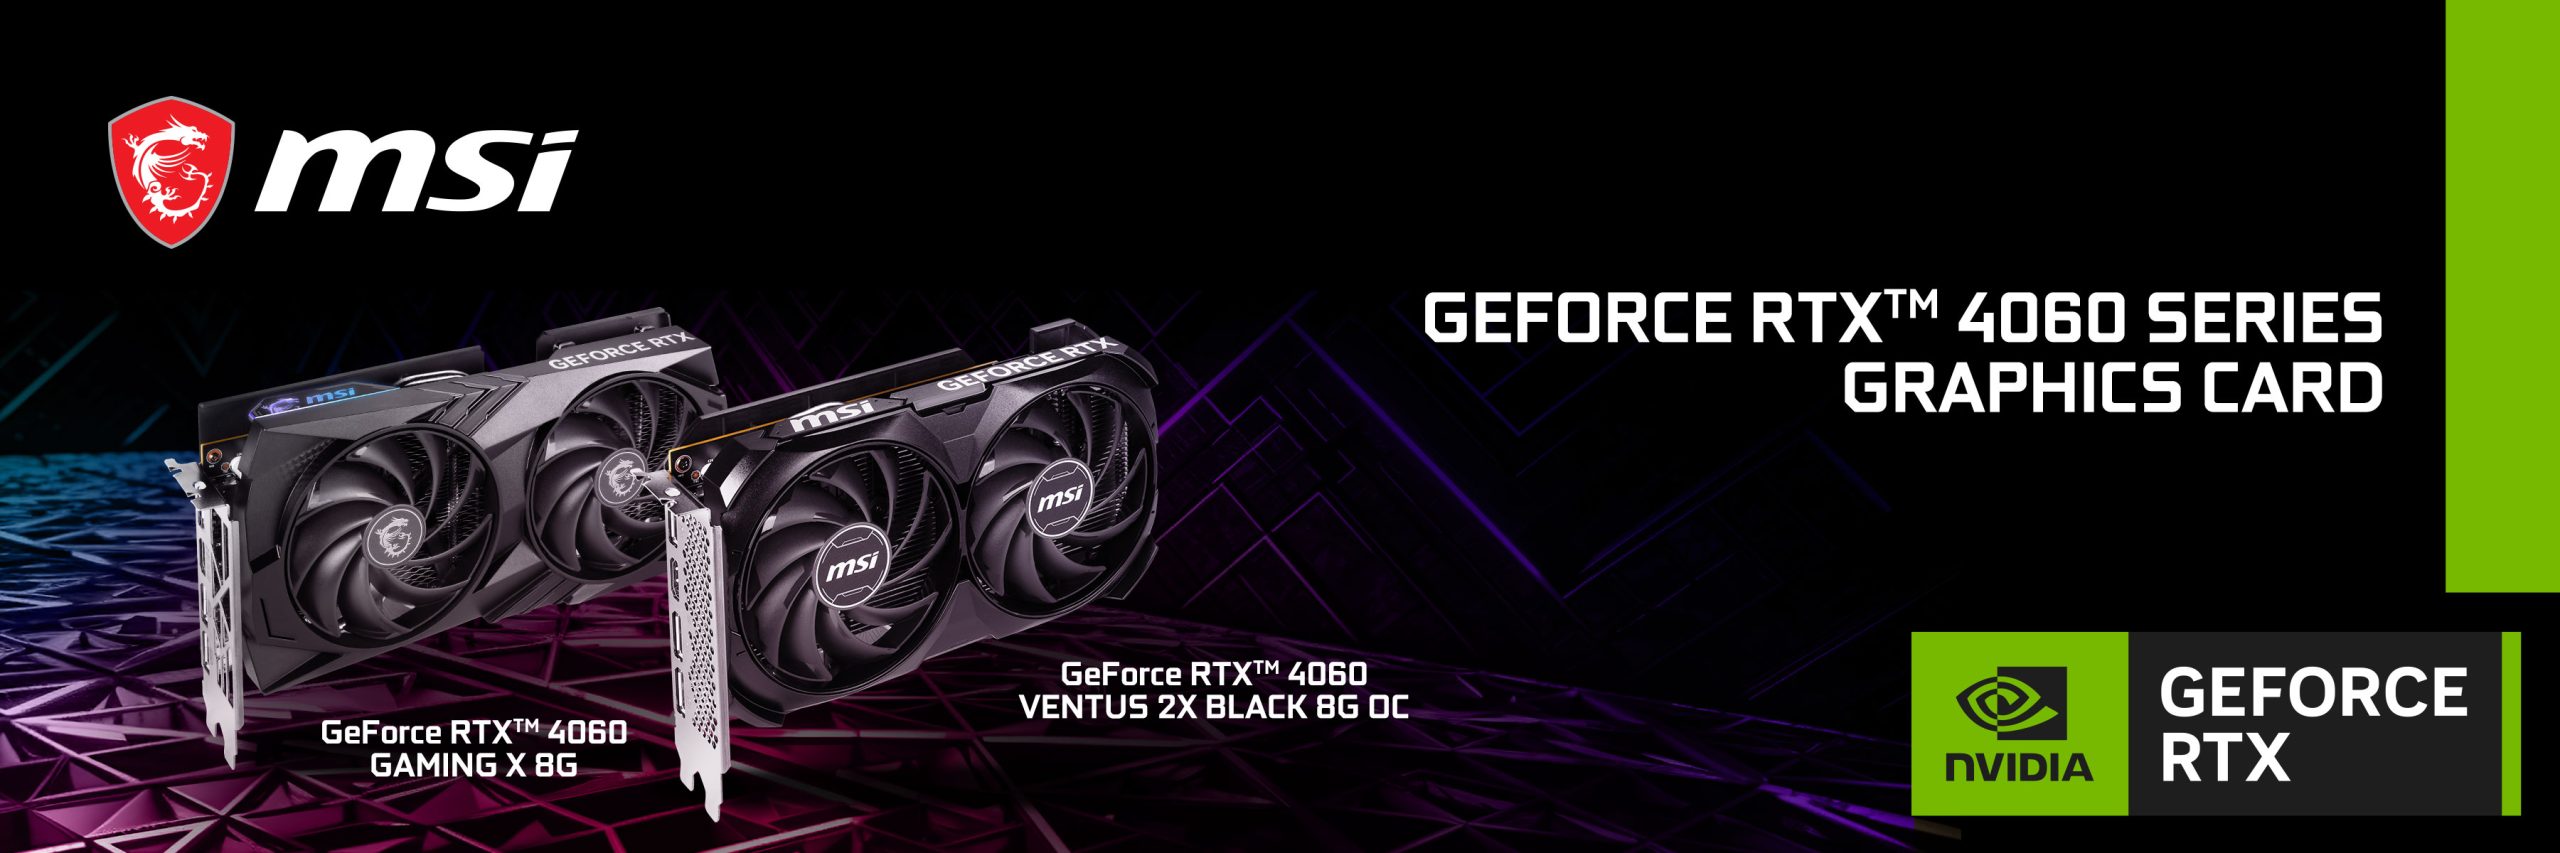 MSI Unveils the NVIDIA GeForce RTX 4060 Series Graphics Cards -  HelloExpress.net